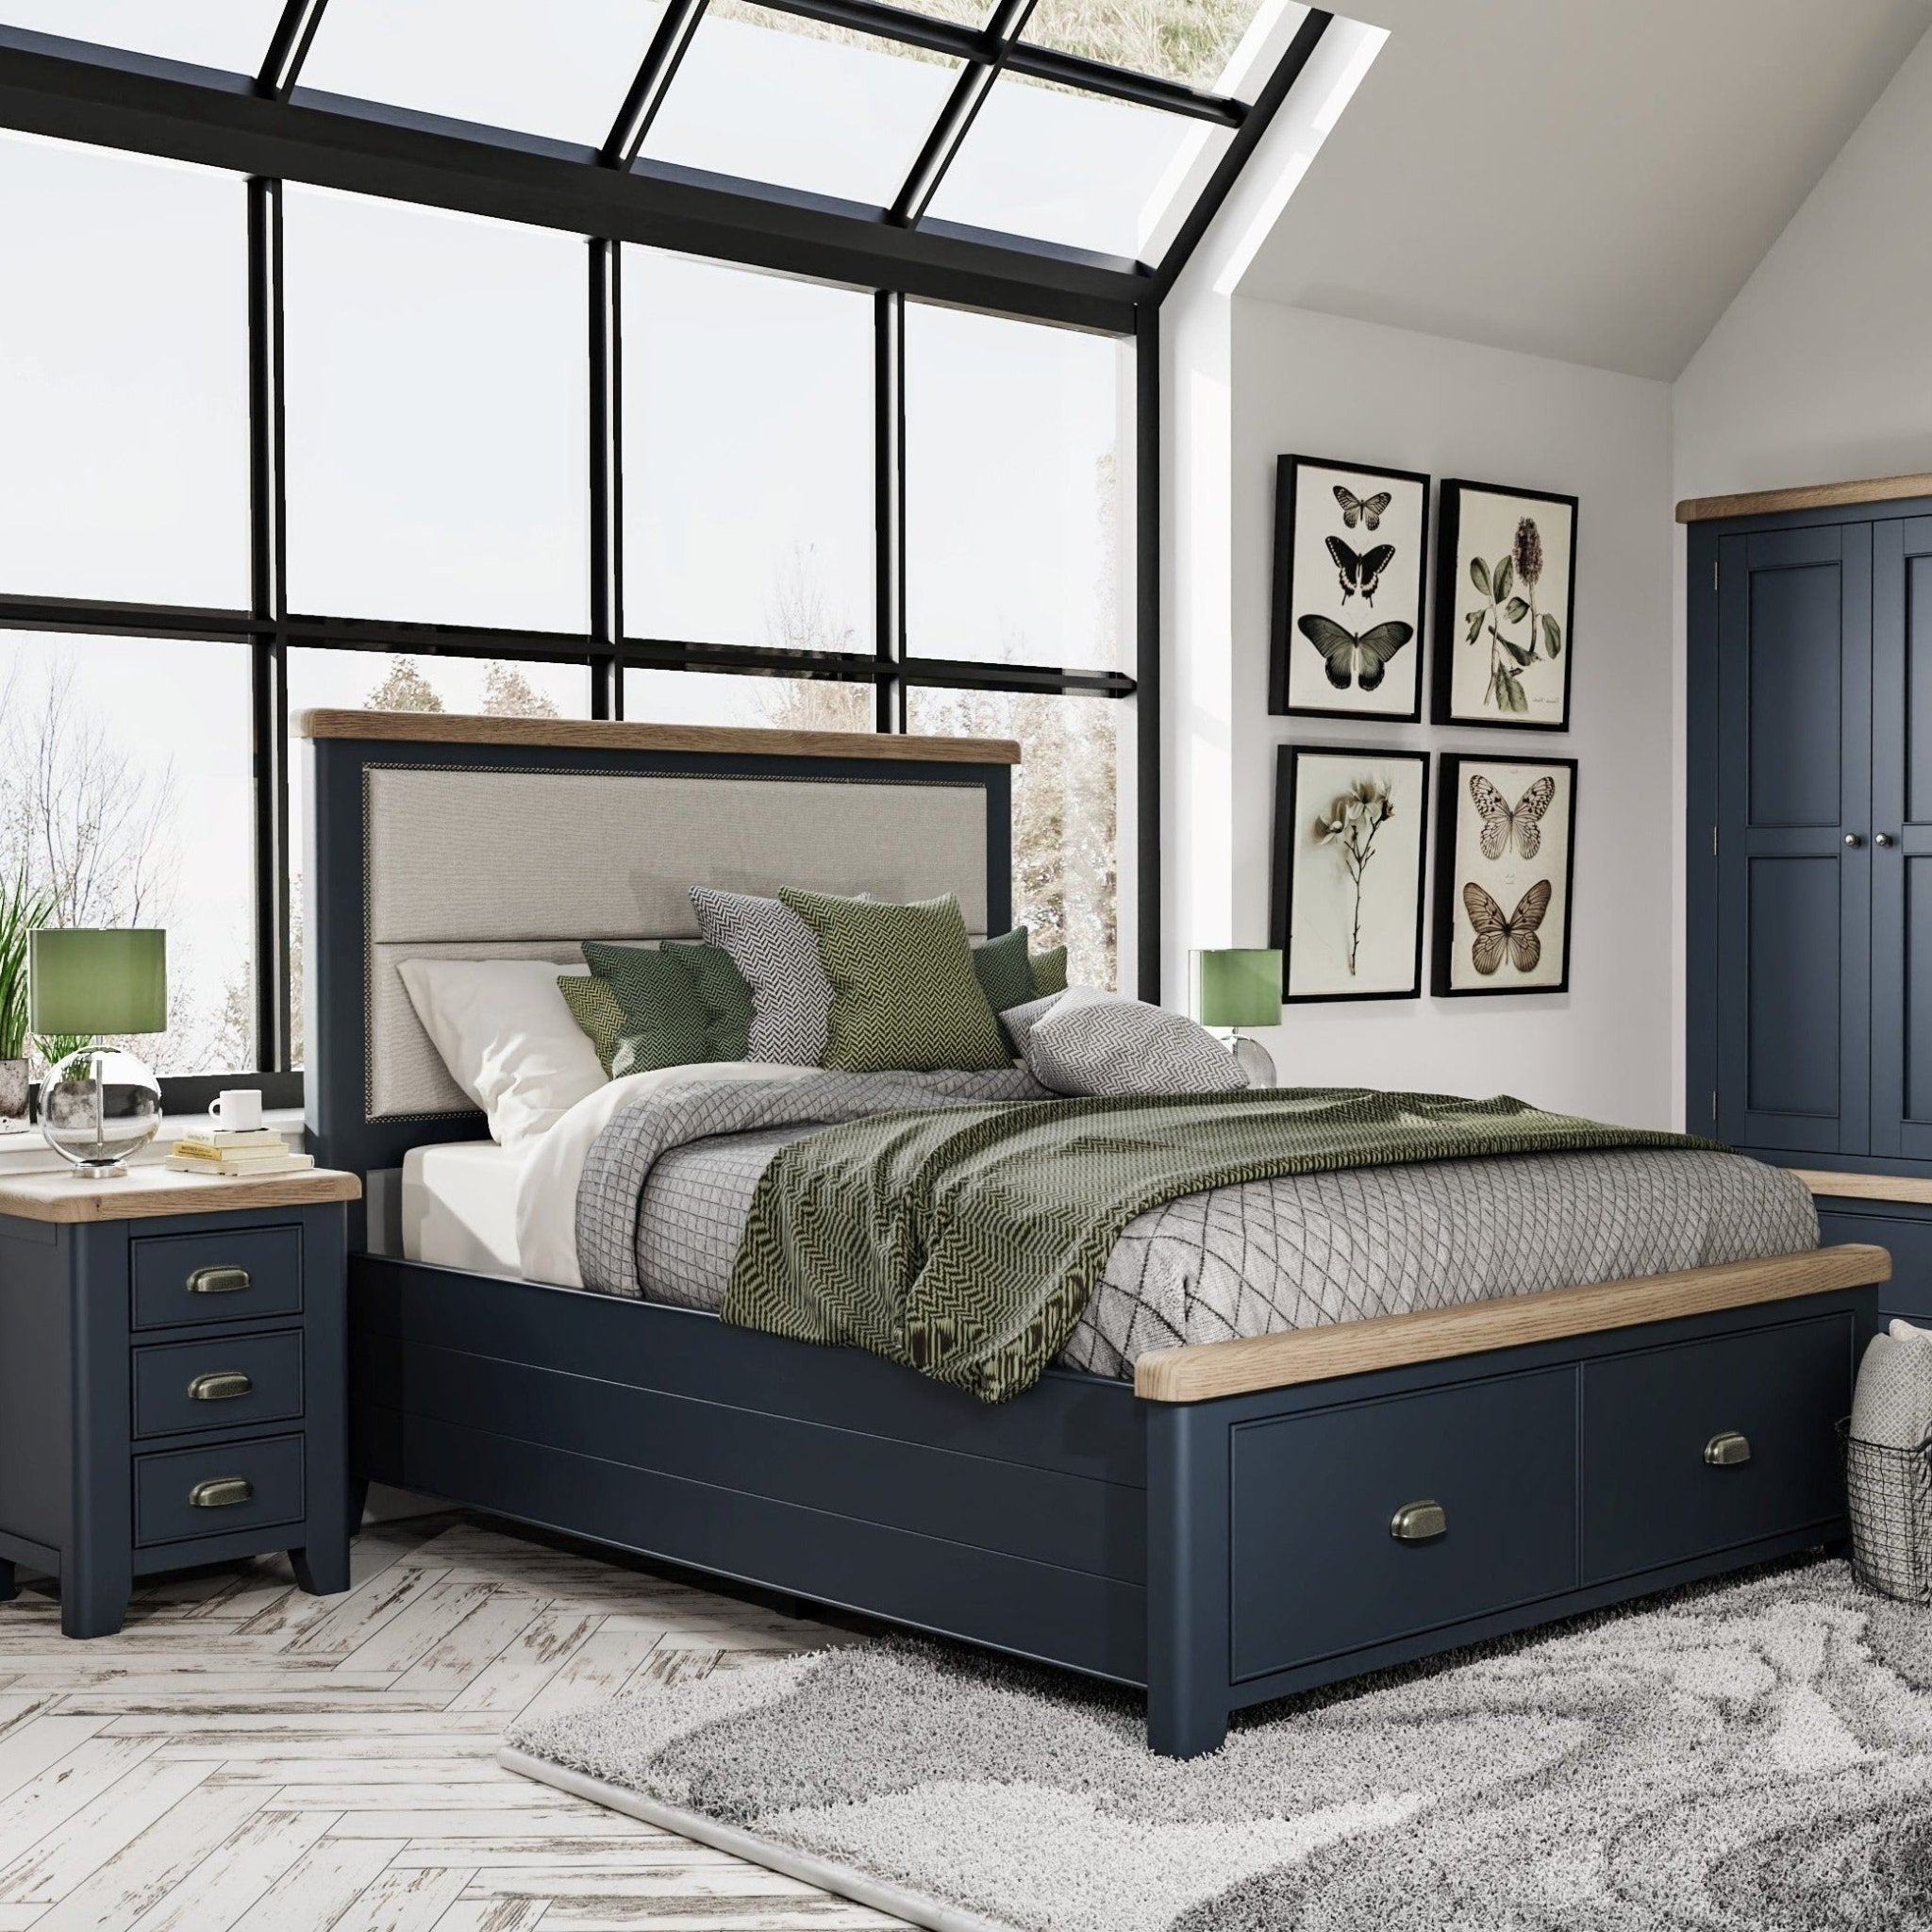 Rogate Blue 6'0 Super King Size Bed Frame - Fabric Headboard & Drawers - Duck Barn Interiors